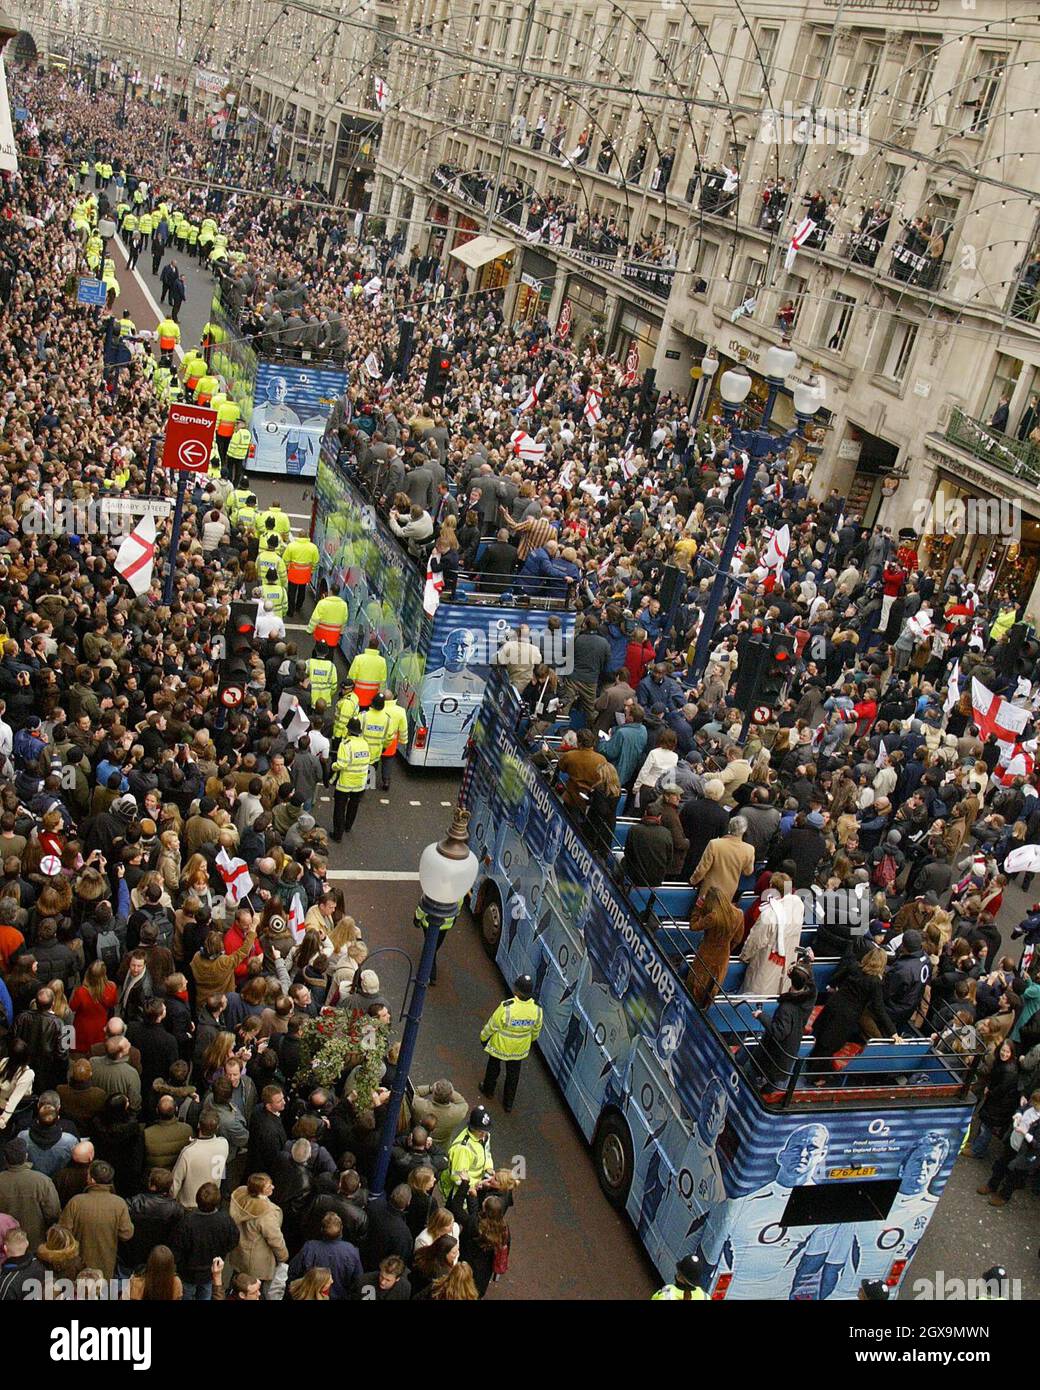 The England rugby team bus makes its way through the thousands of jubilant fans on Regent Street during the World Cup victory parade. Stock Photo